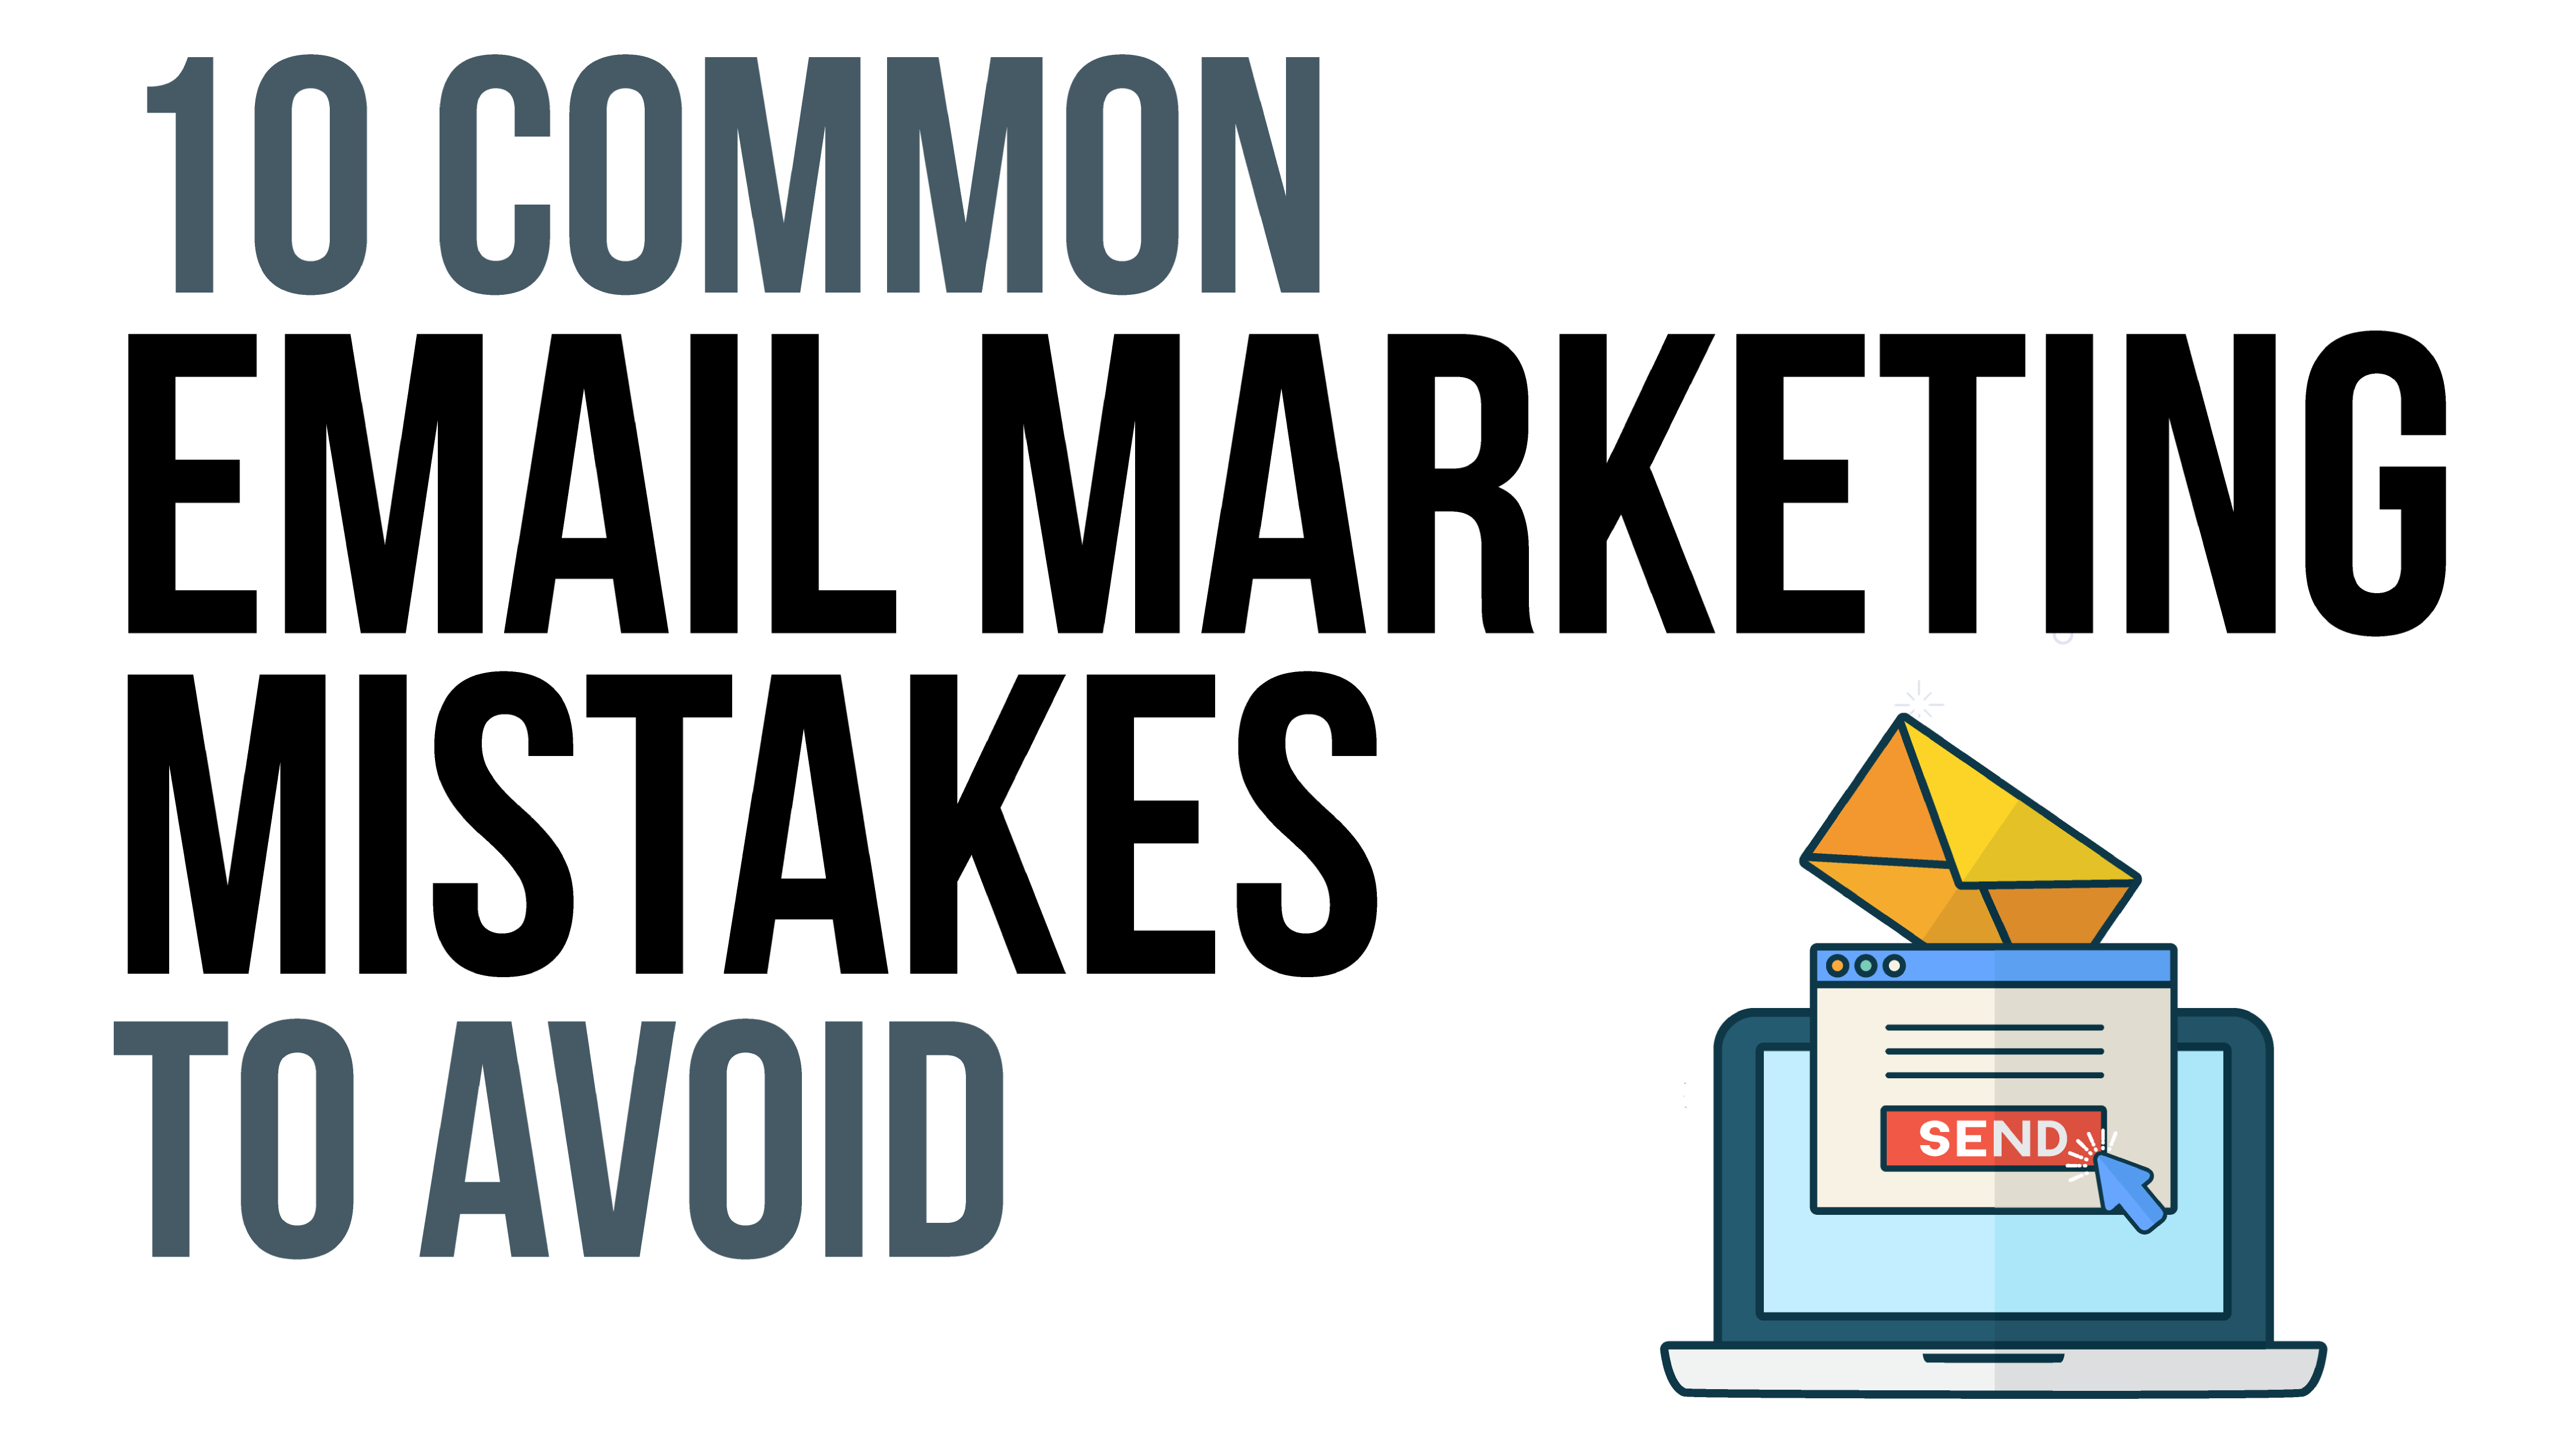 10 Common Email Marketing Mistakes to Avoid